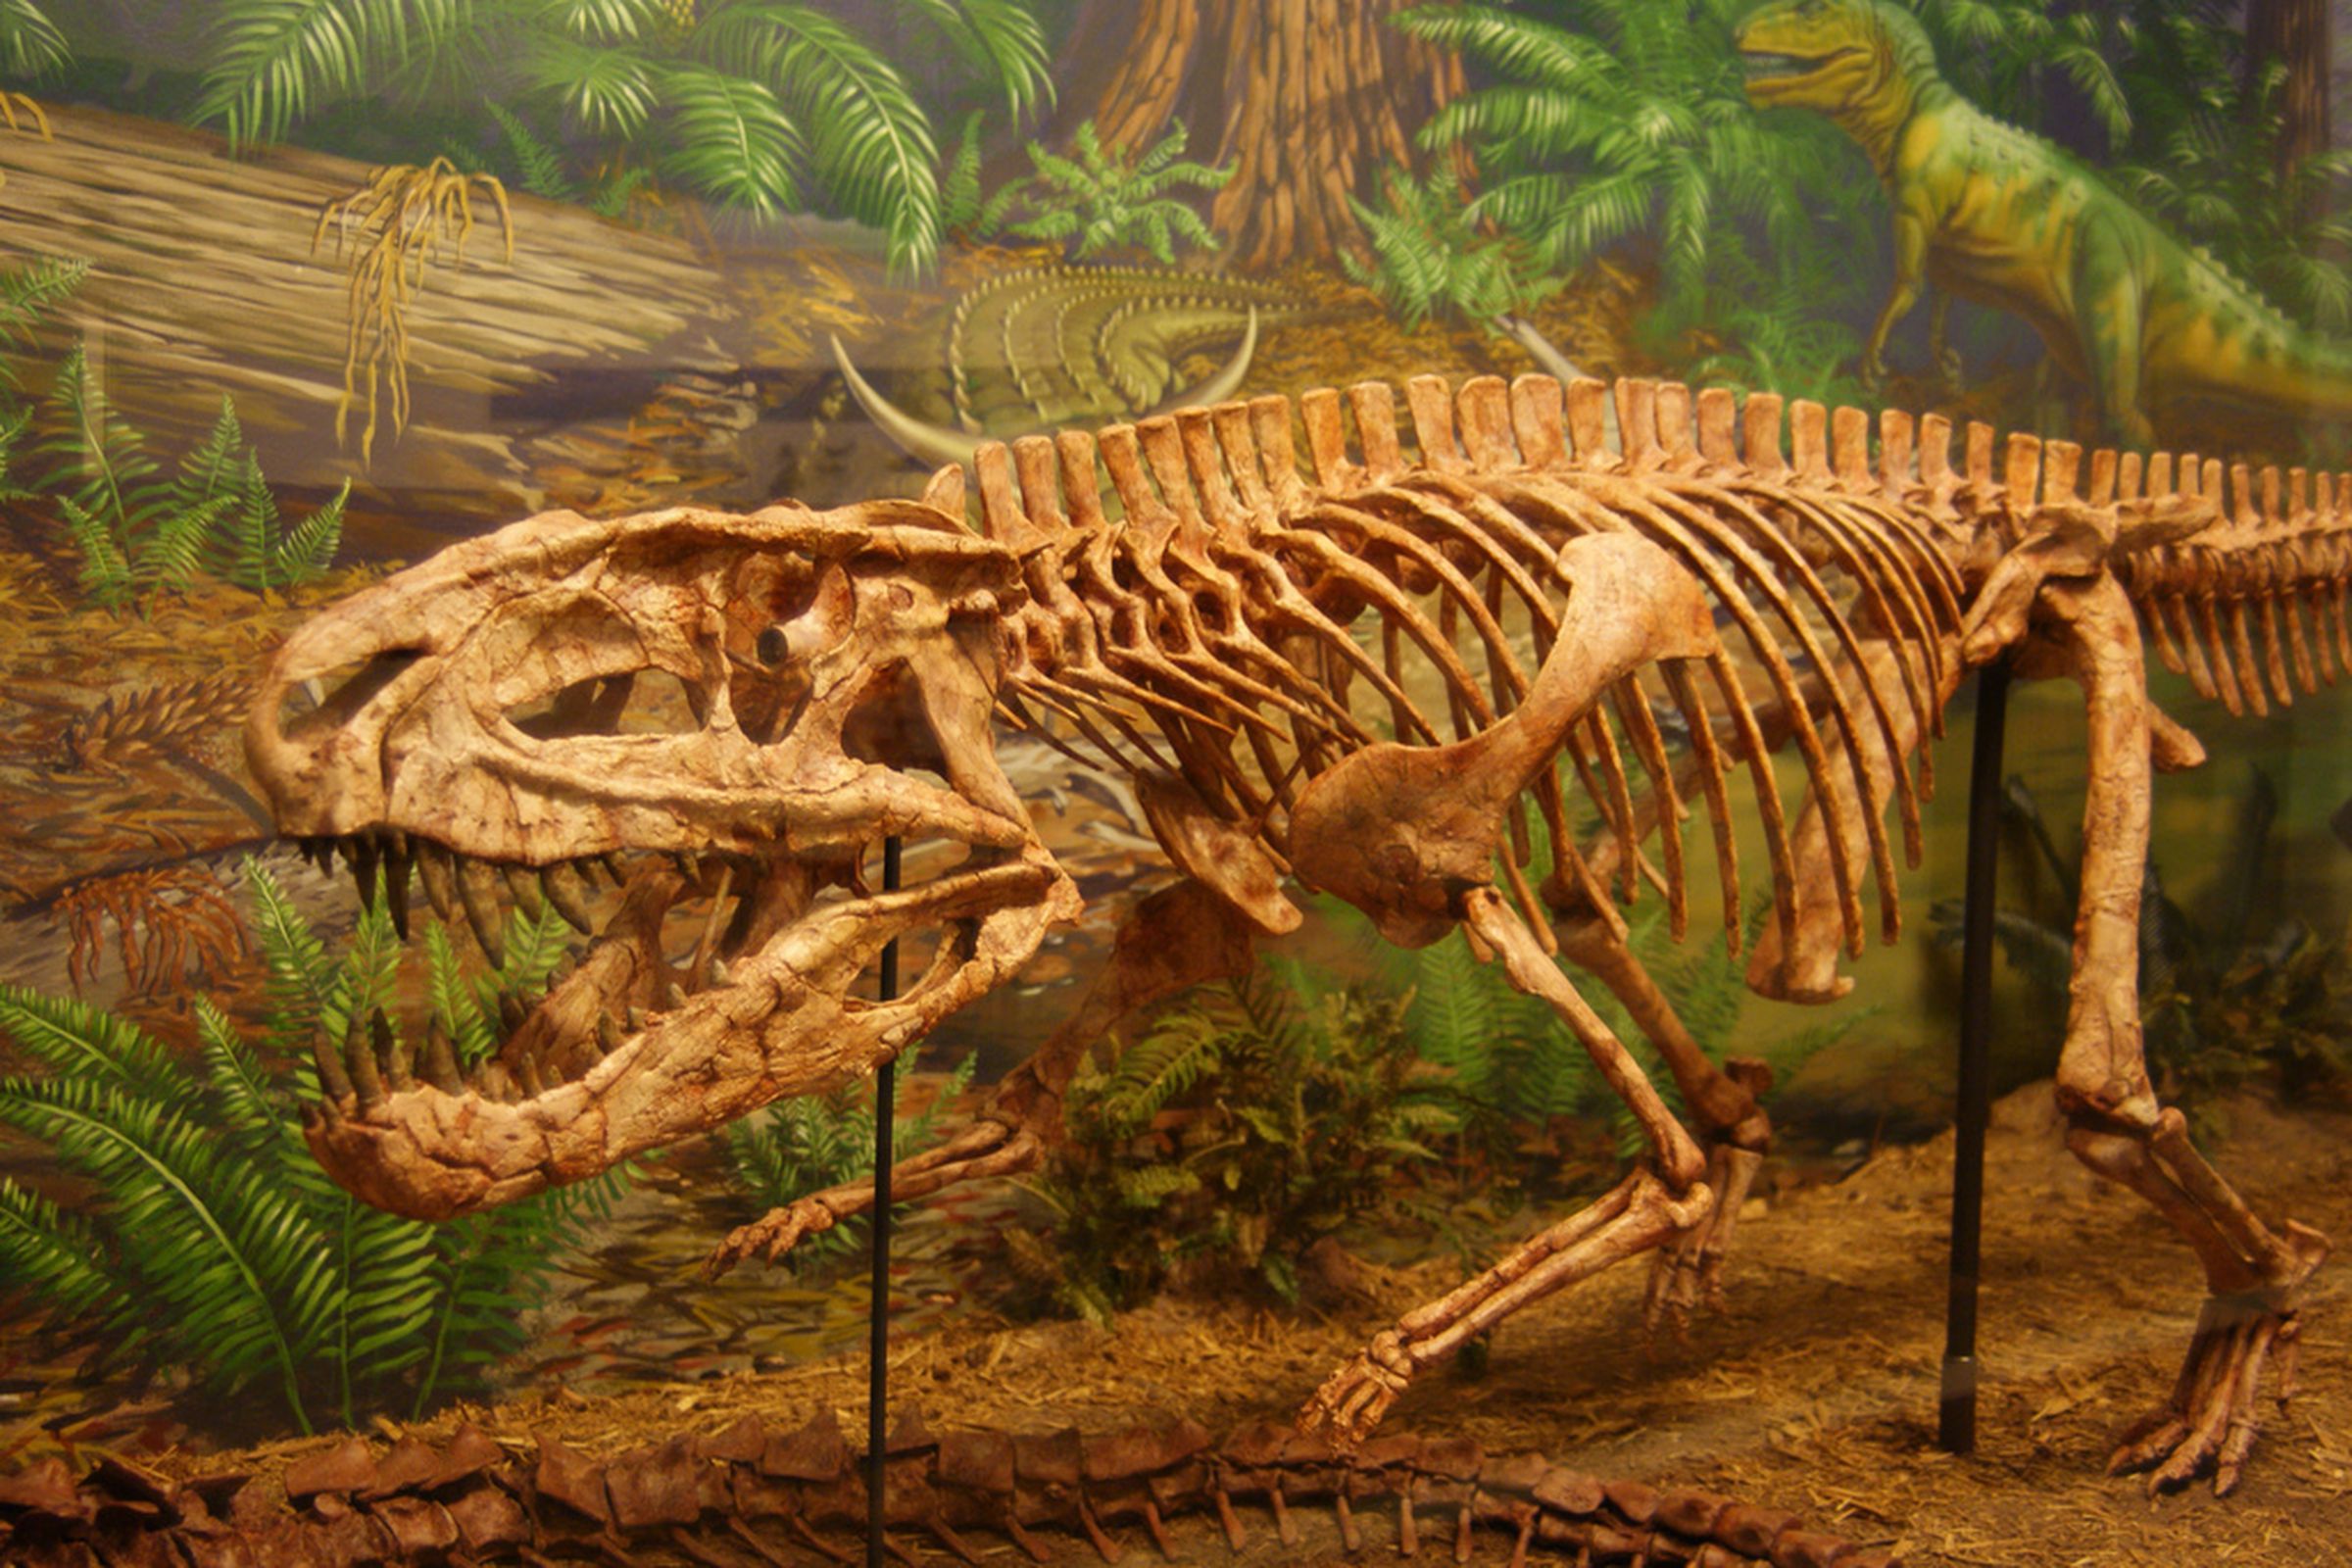 Postosuchus, a Triassic archosaur at the Museum of Texas Tech University, by Dallas Krentzel on Flickr, CC-BY-2.0. 